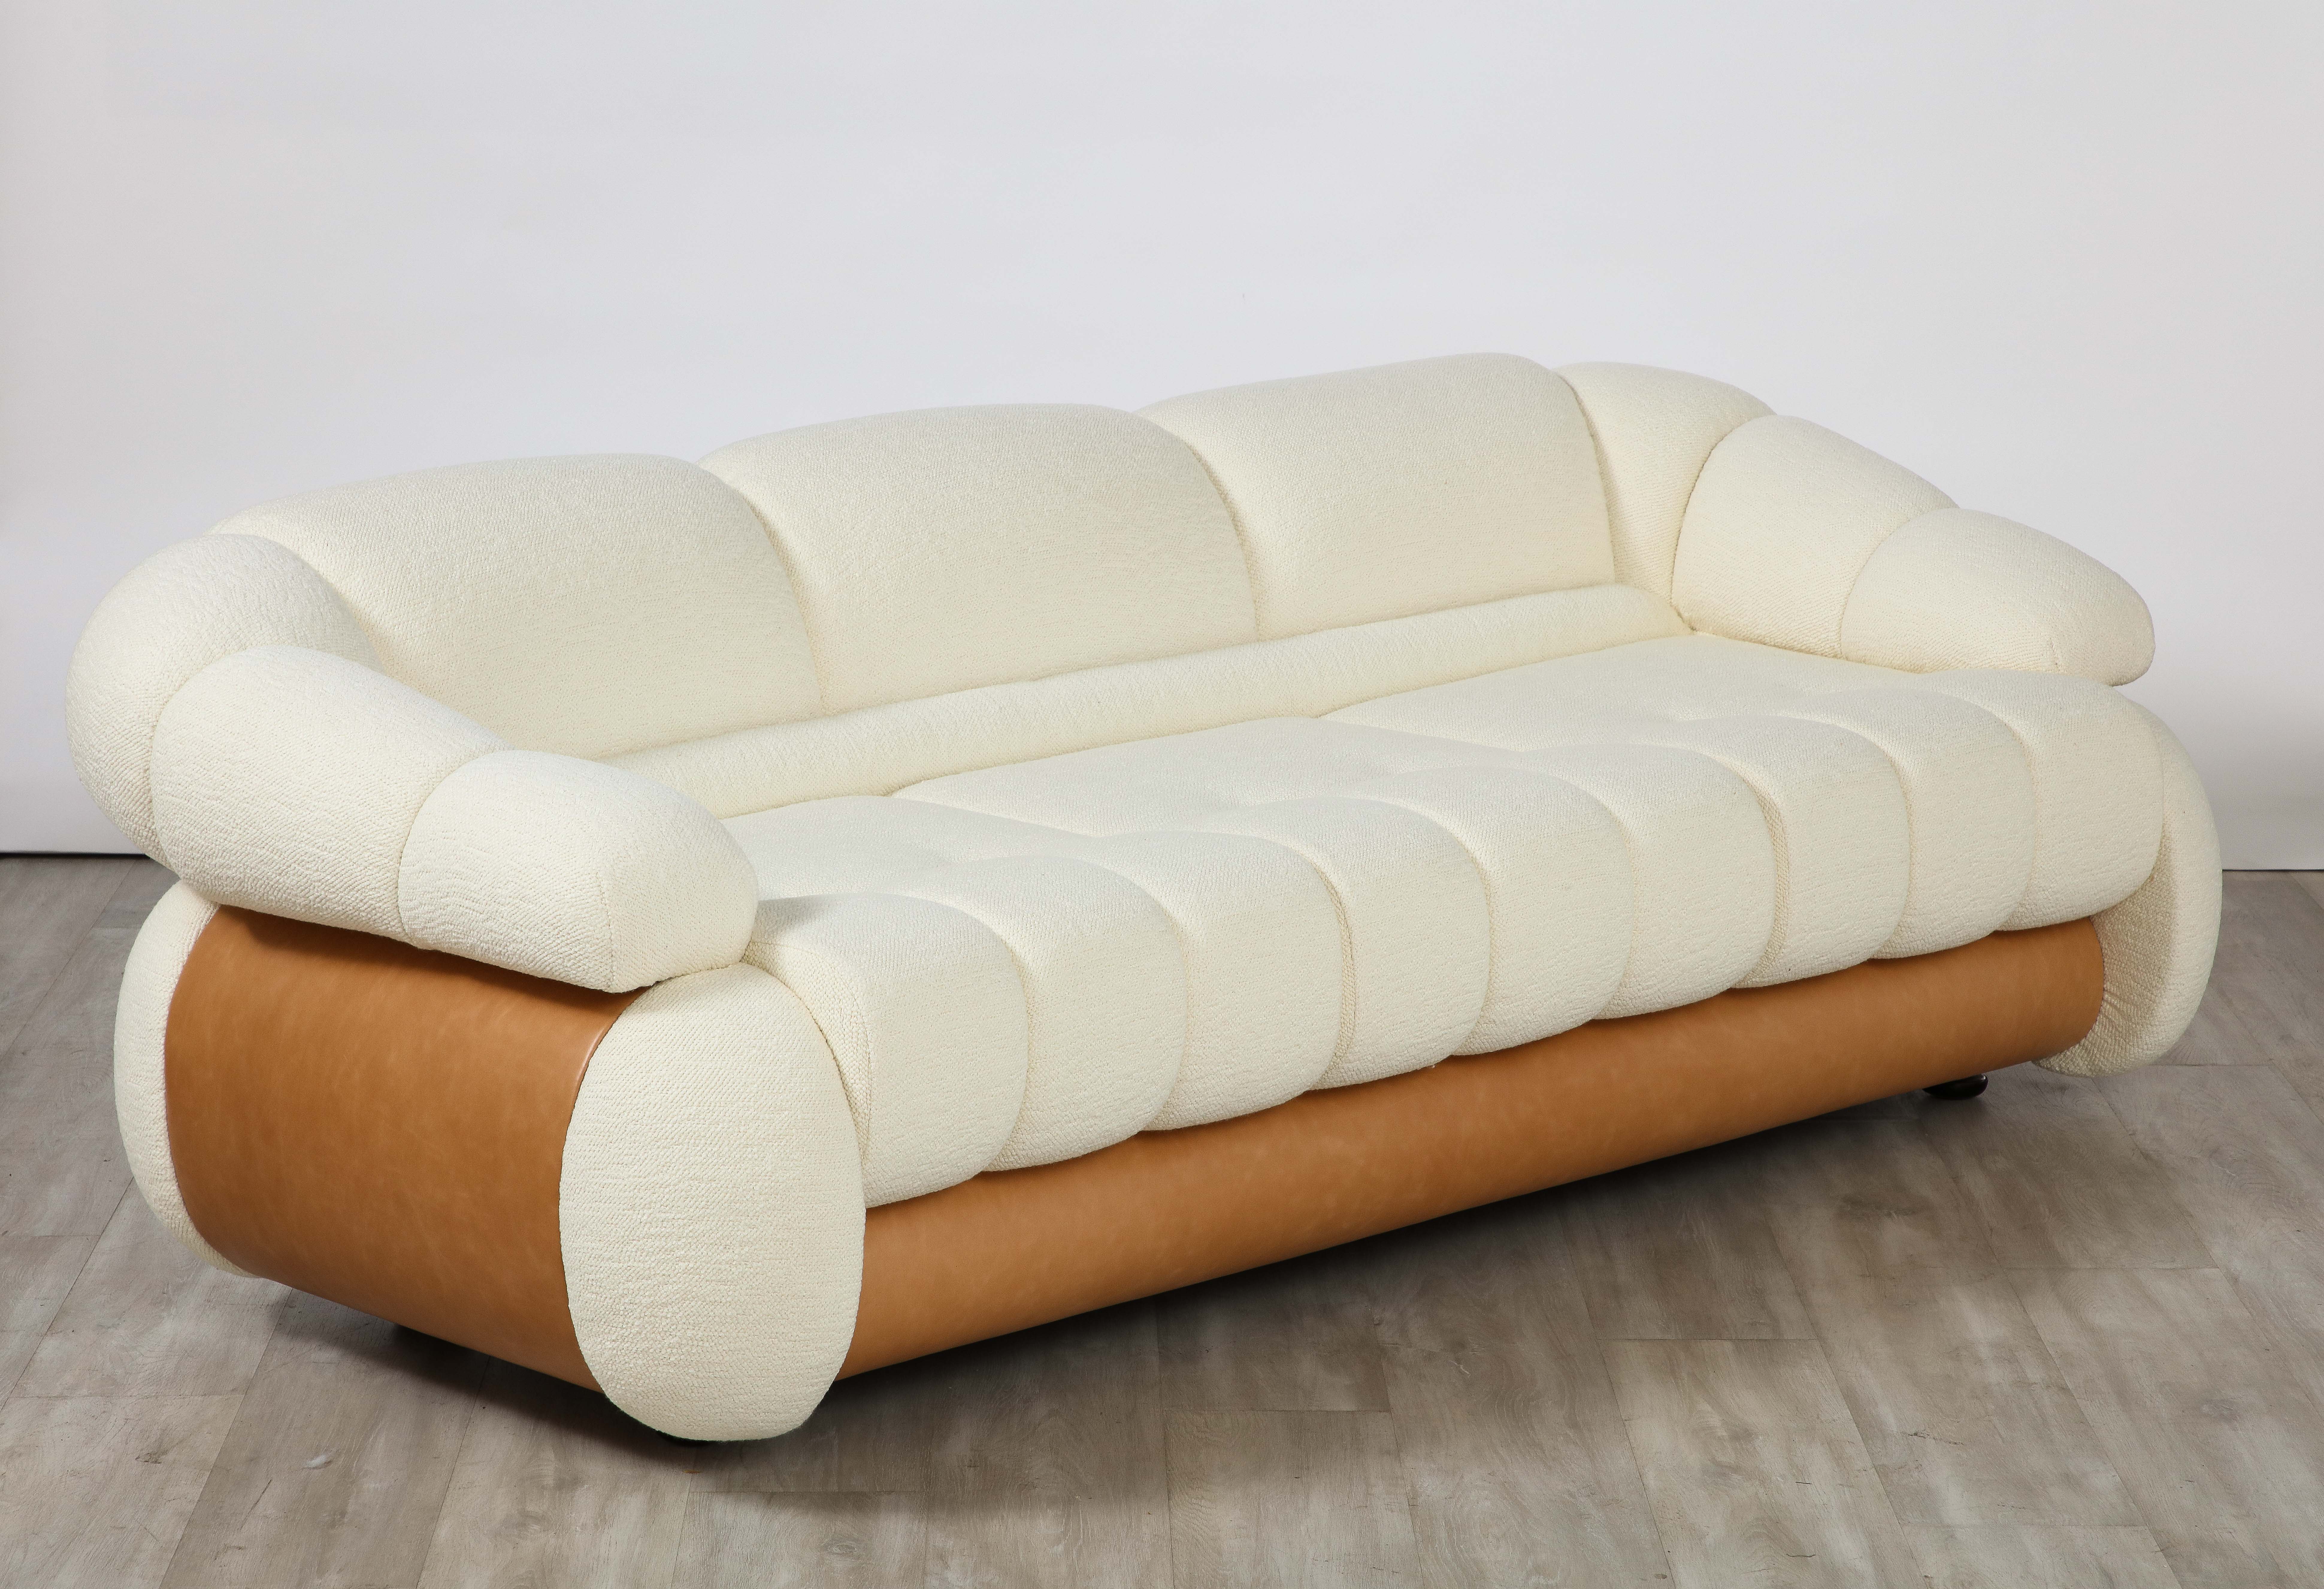 Adriano Piazzesi Italian 1970's sofa; the whole with channel and tufted upholstery, the sides and back are curved and covered in a warm brown Italian leather. The sofa is constructed of original solid wood structure and has been completely restored